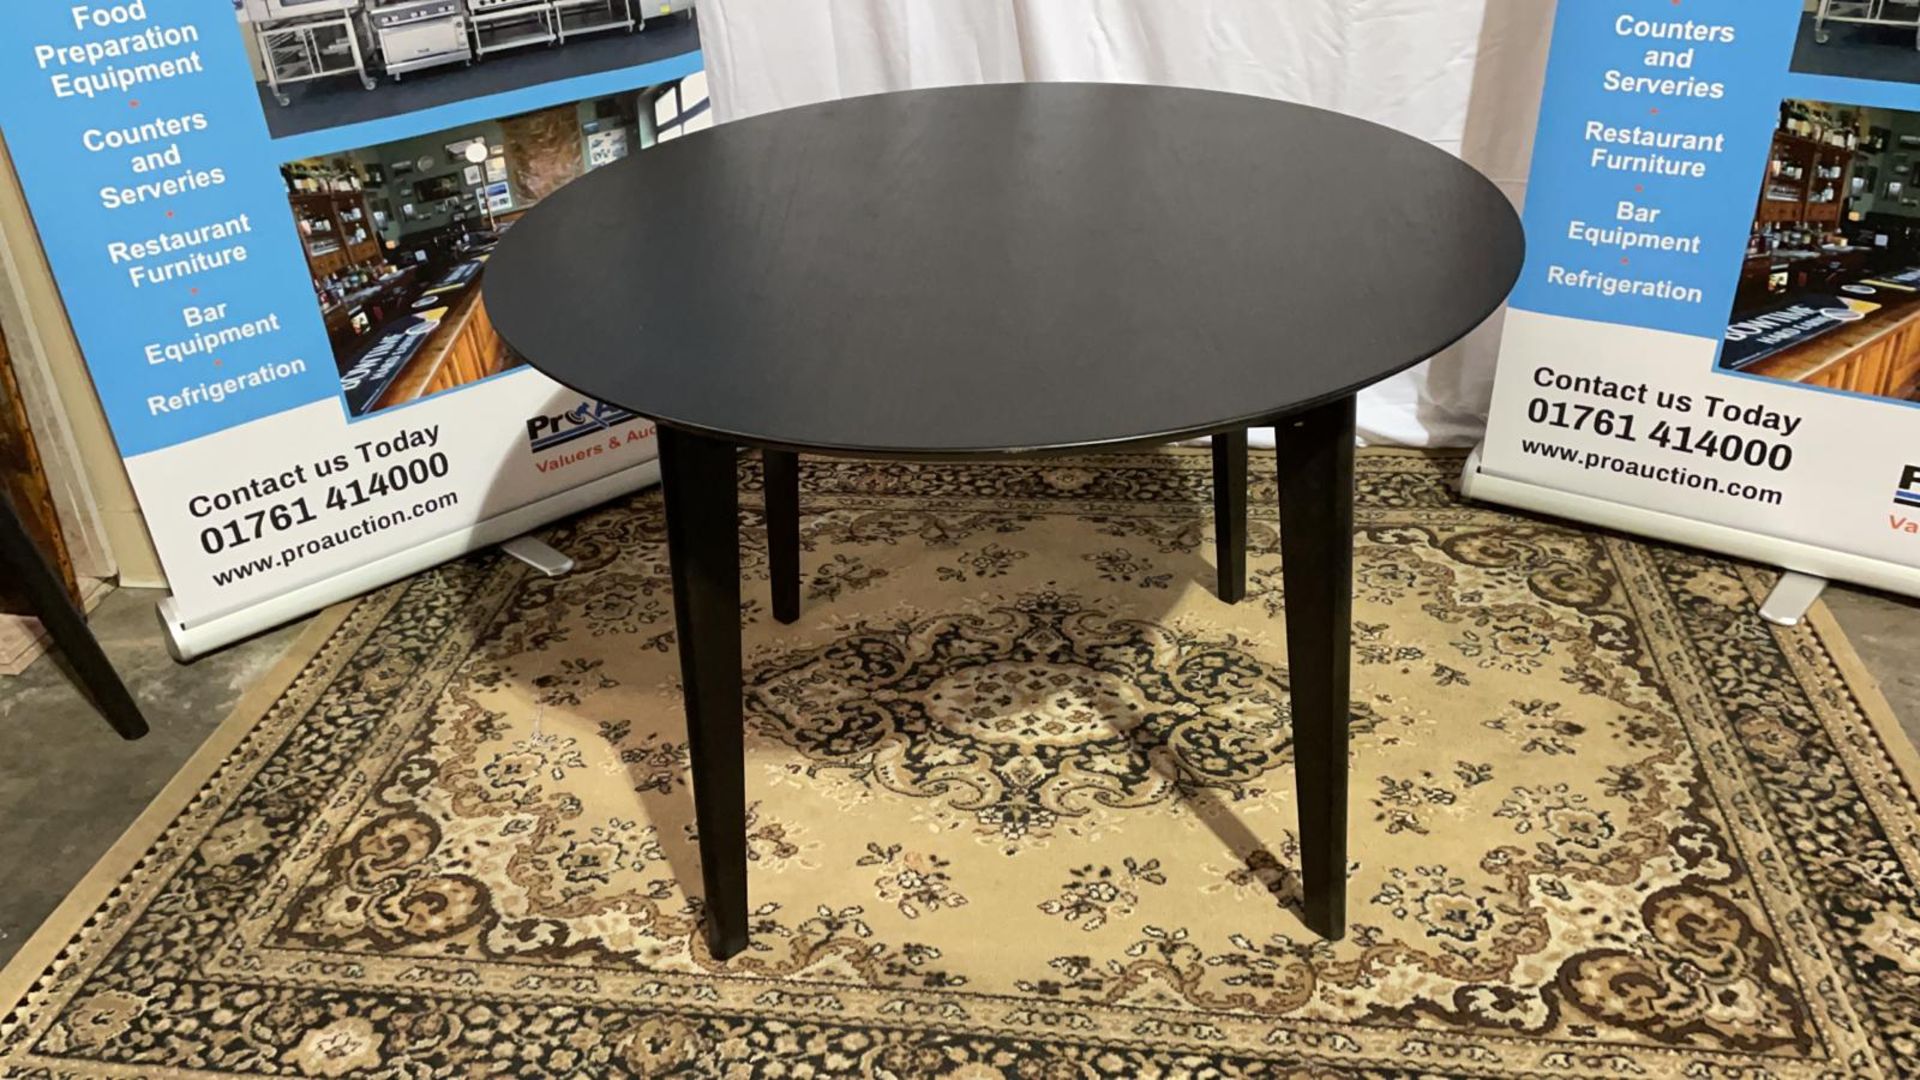 Wycombe Dining Table Round Black 1100 x 1100 The Wycombe Has A Contemporary Look Is Subtle In Colour - Image 6 of 6